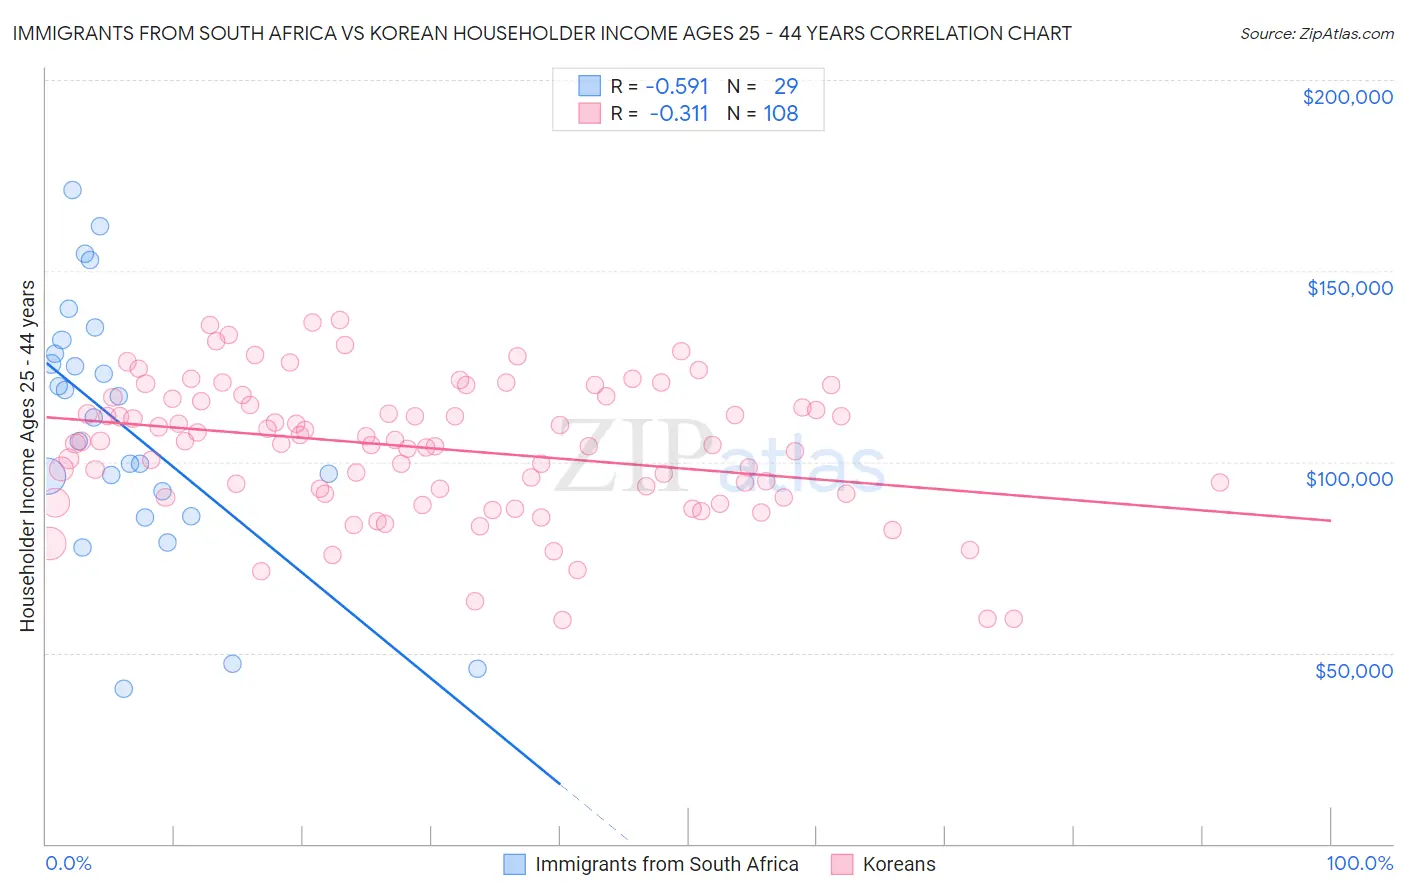 Immigrants from South Africa vs Korean Householder Income Ages 25 - 44 years